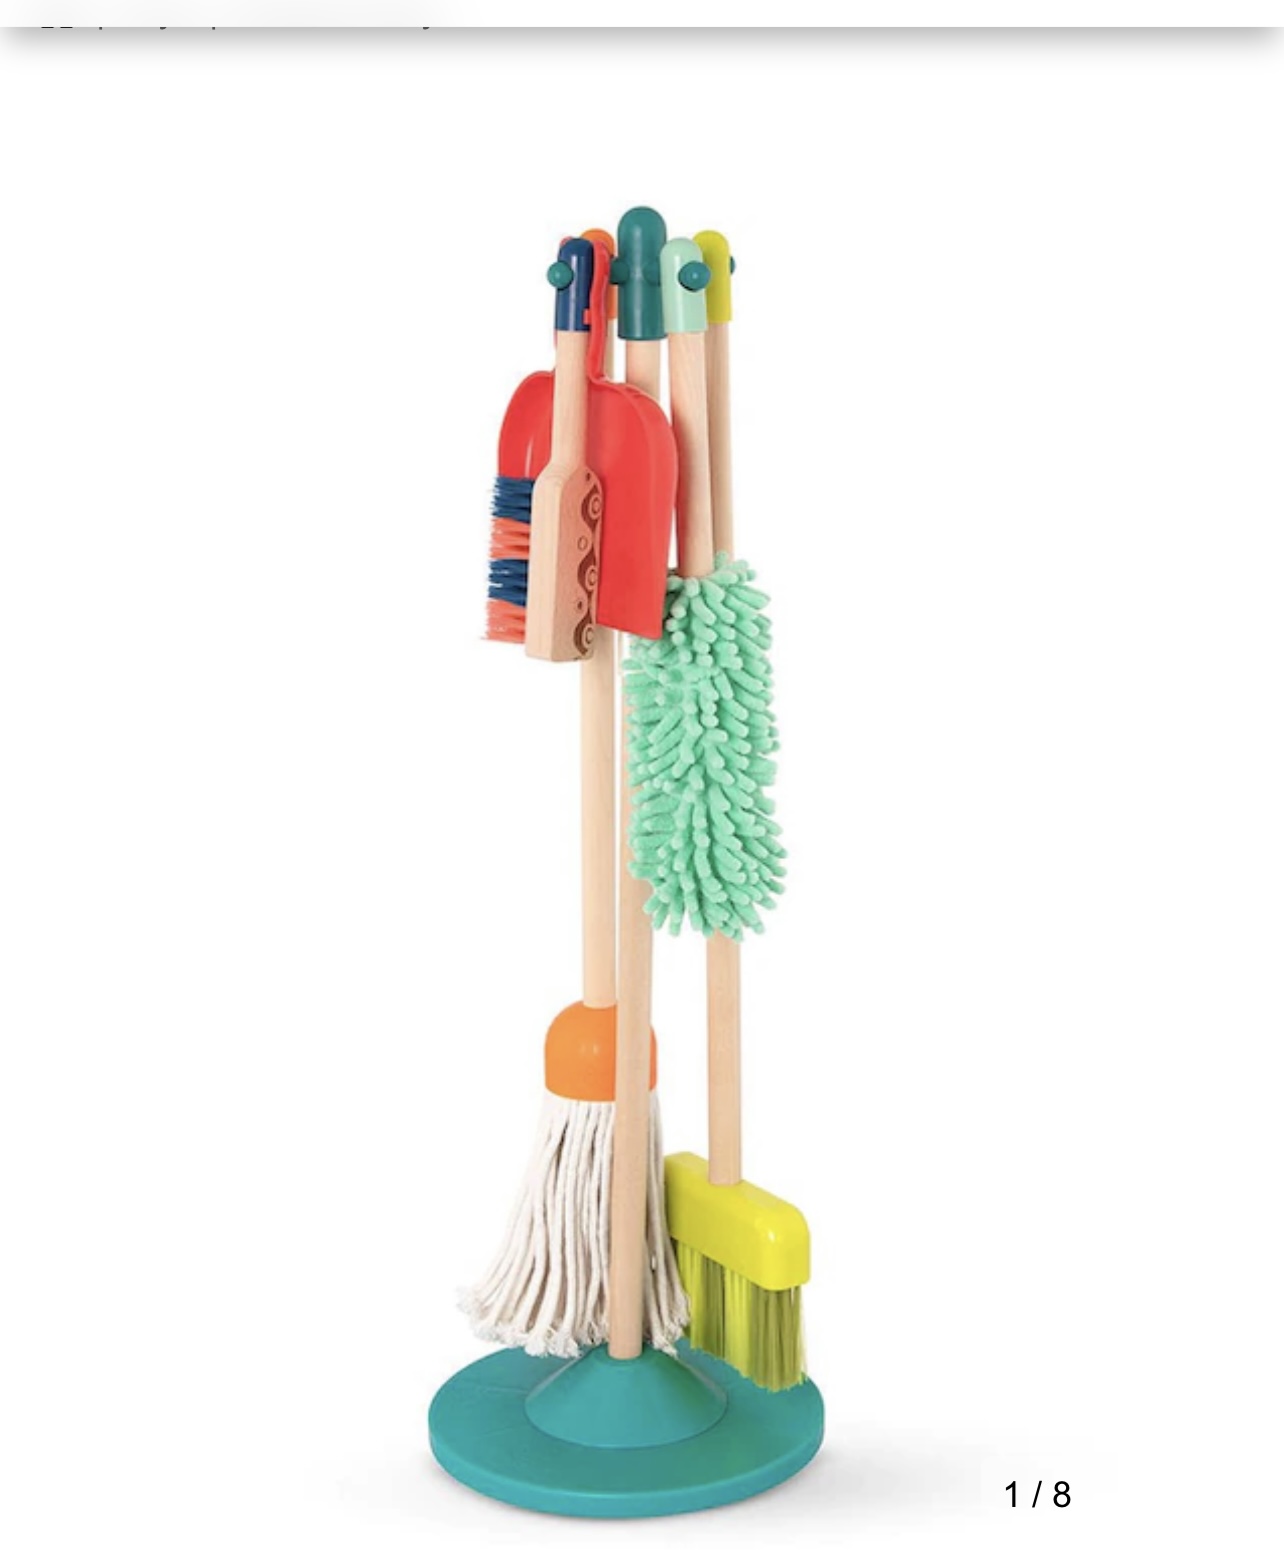 Toddler cleaning set- $35